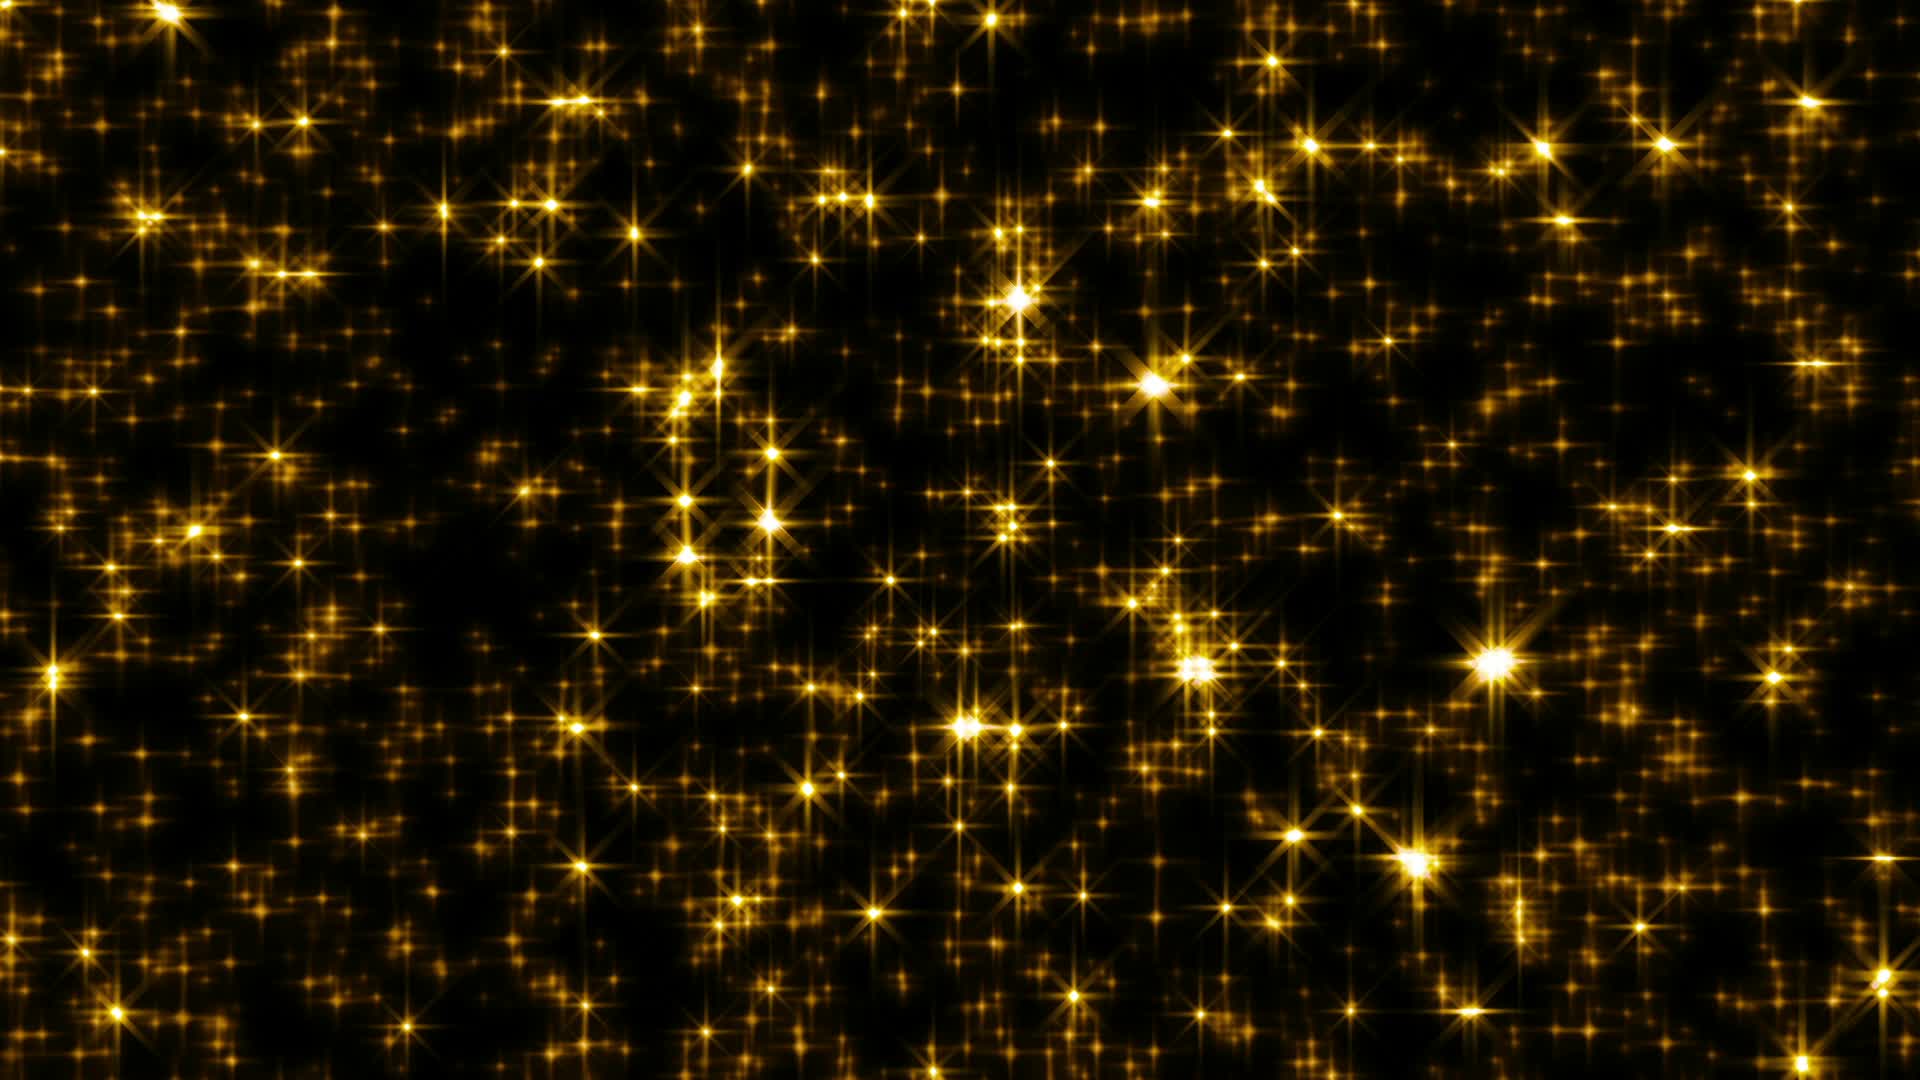 Black and Gold Wallpapers - Top Free Black and Gold Backgrounds